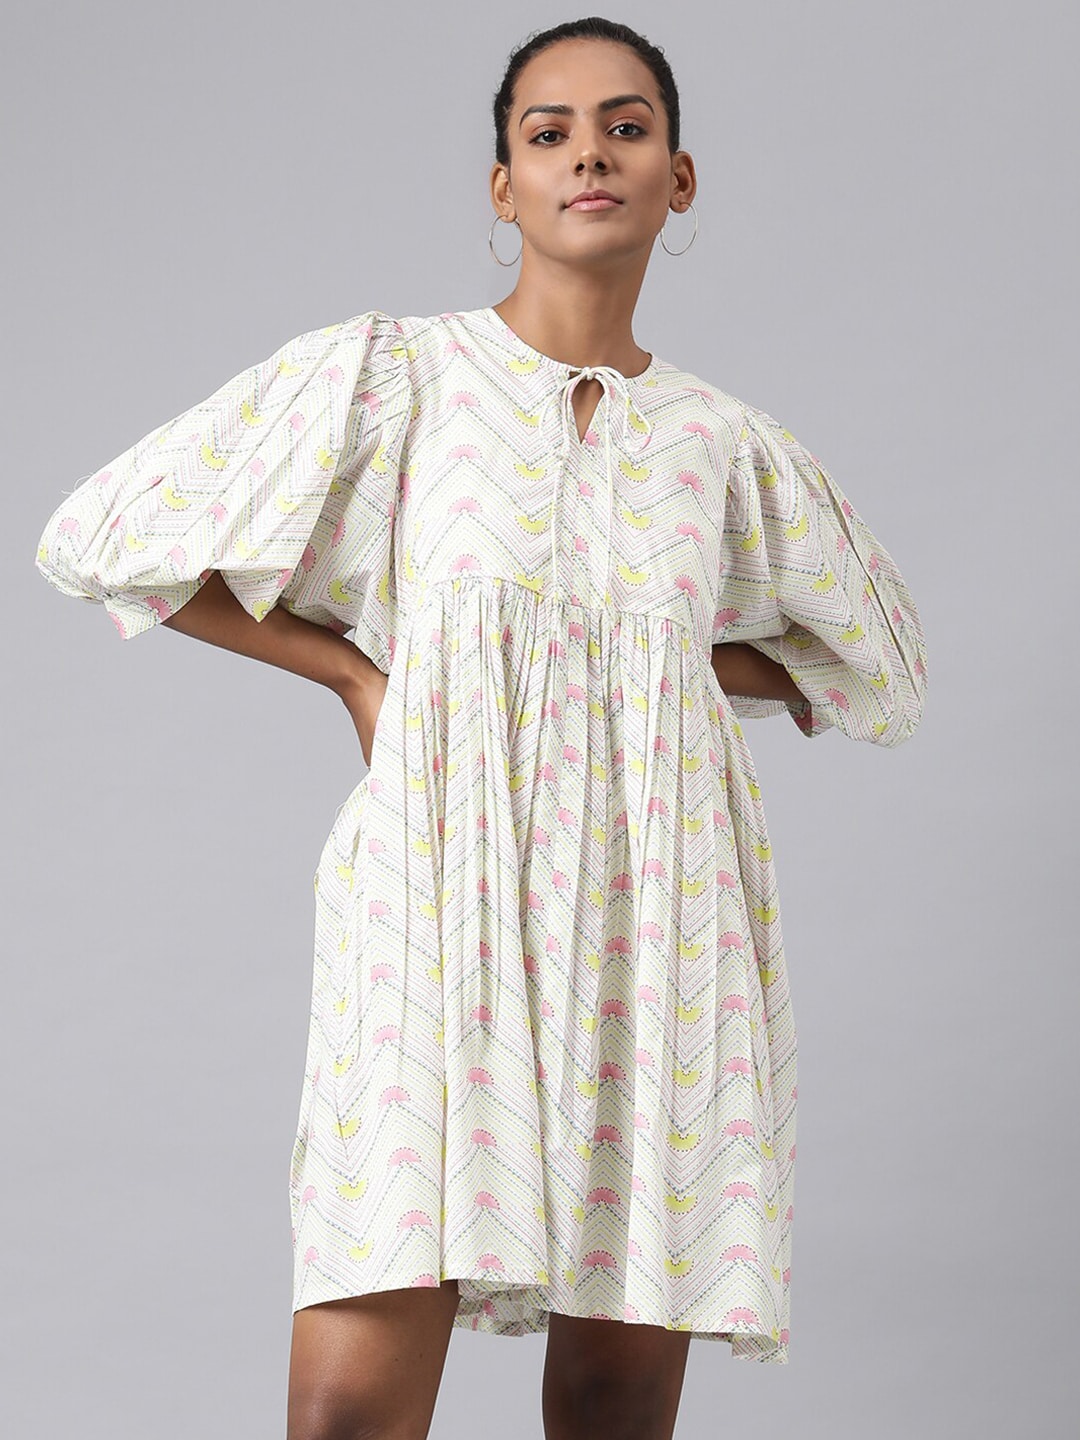 Fabindia Pink & White Ethnic Motifs Tie-Up Neck A-Line Dress Price in India